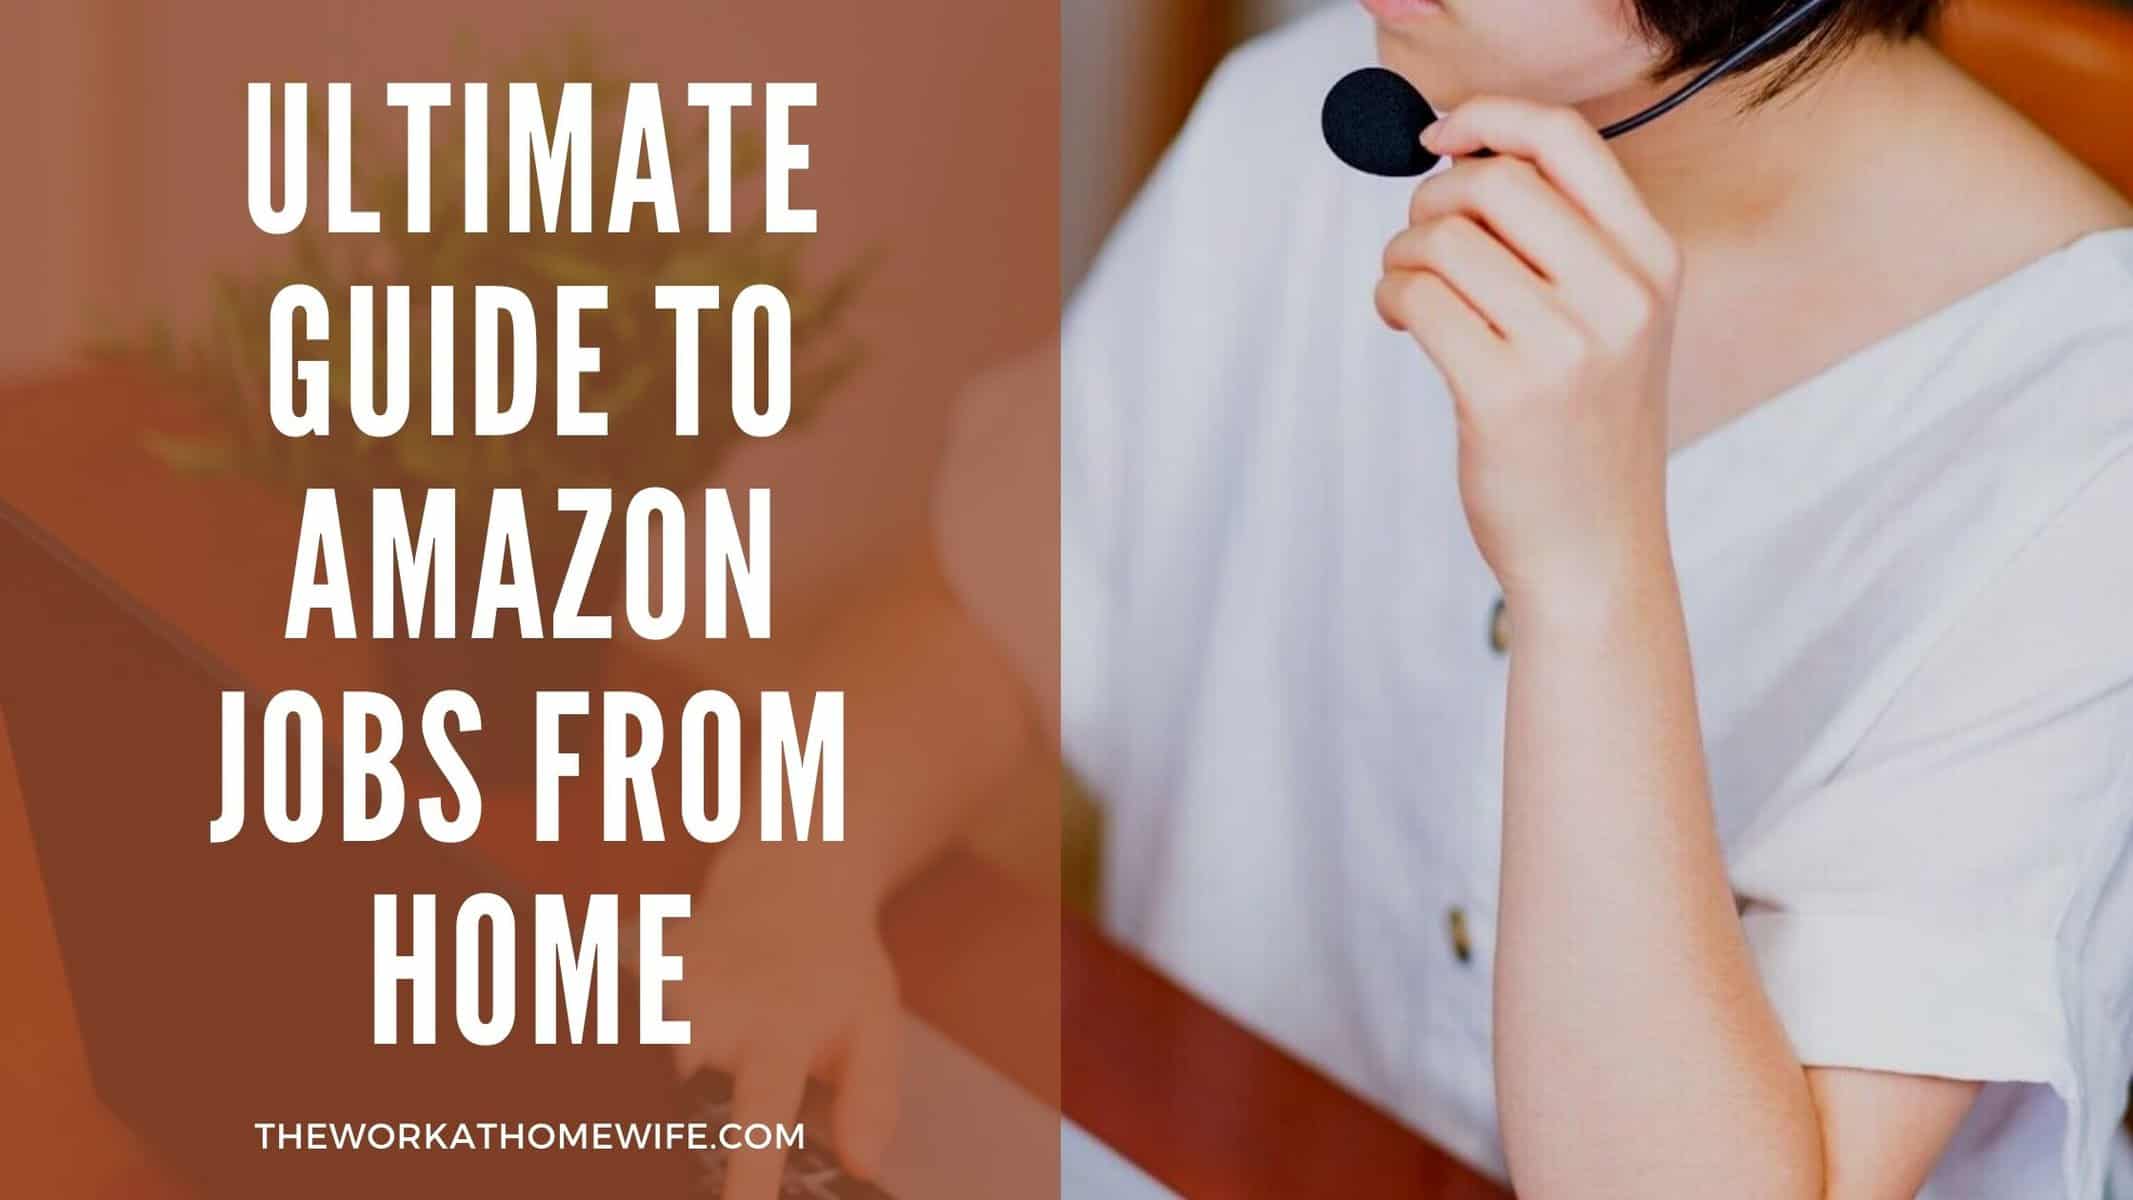 Ultimate Guide to Amazon Jobs From Home